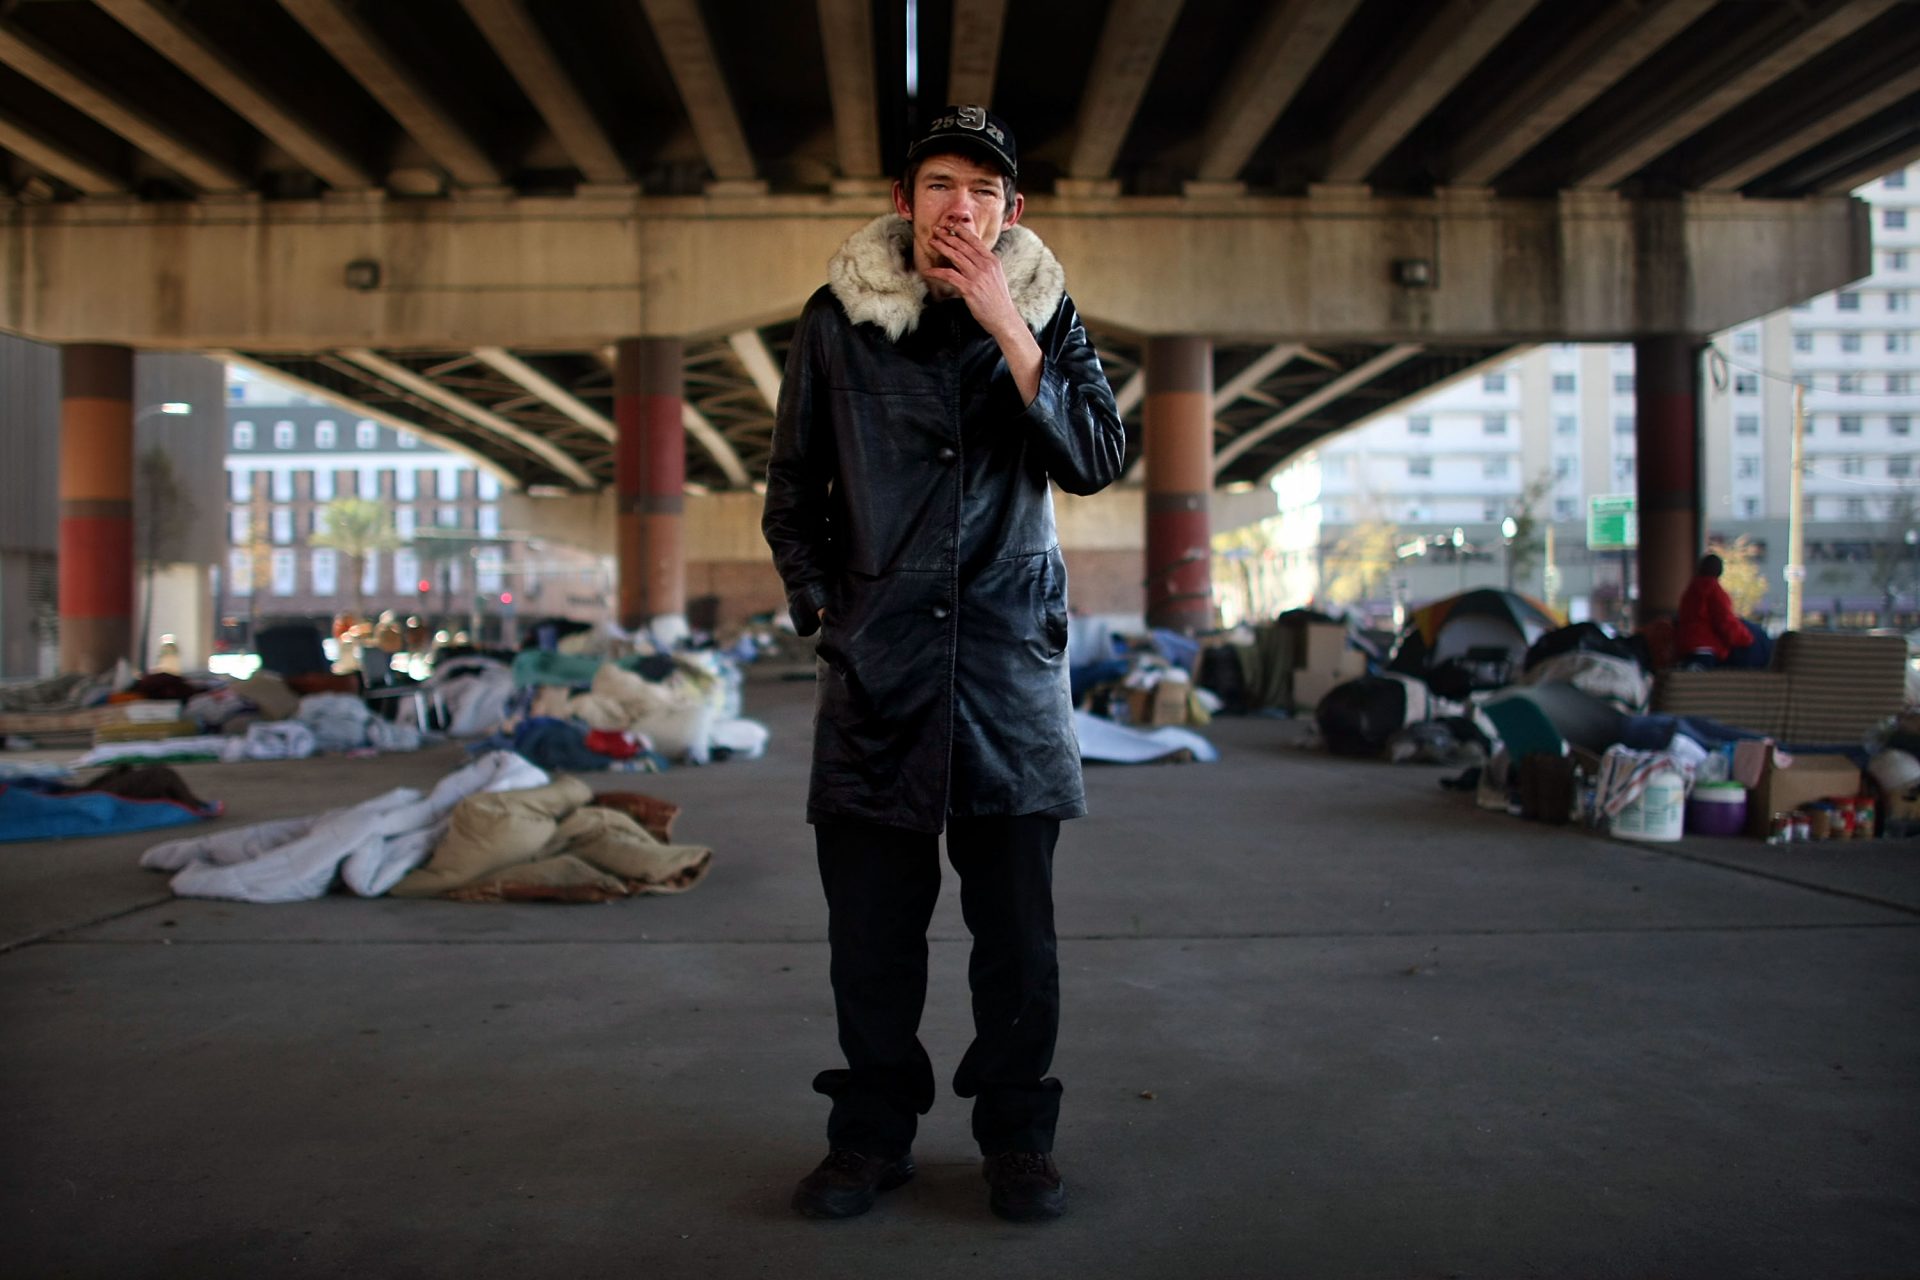 Researchers gave homeless people $7,500. Here’s what happened.